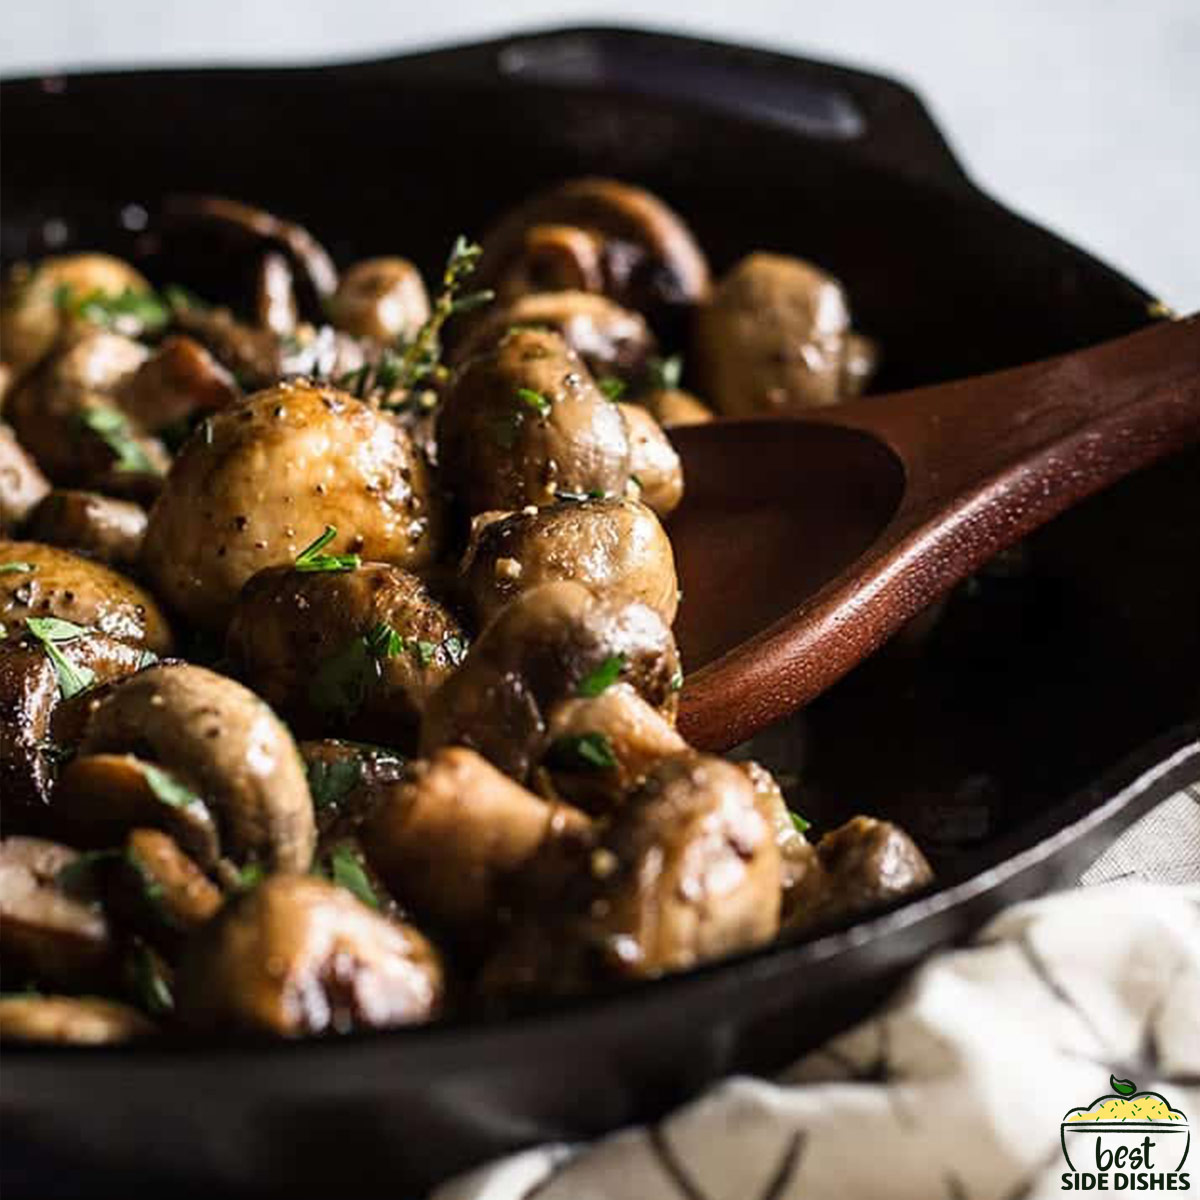 sauteed garlic mushrooms in a skillet with a wooden spoon